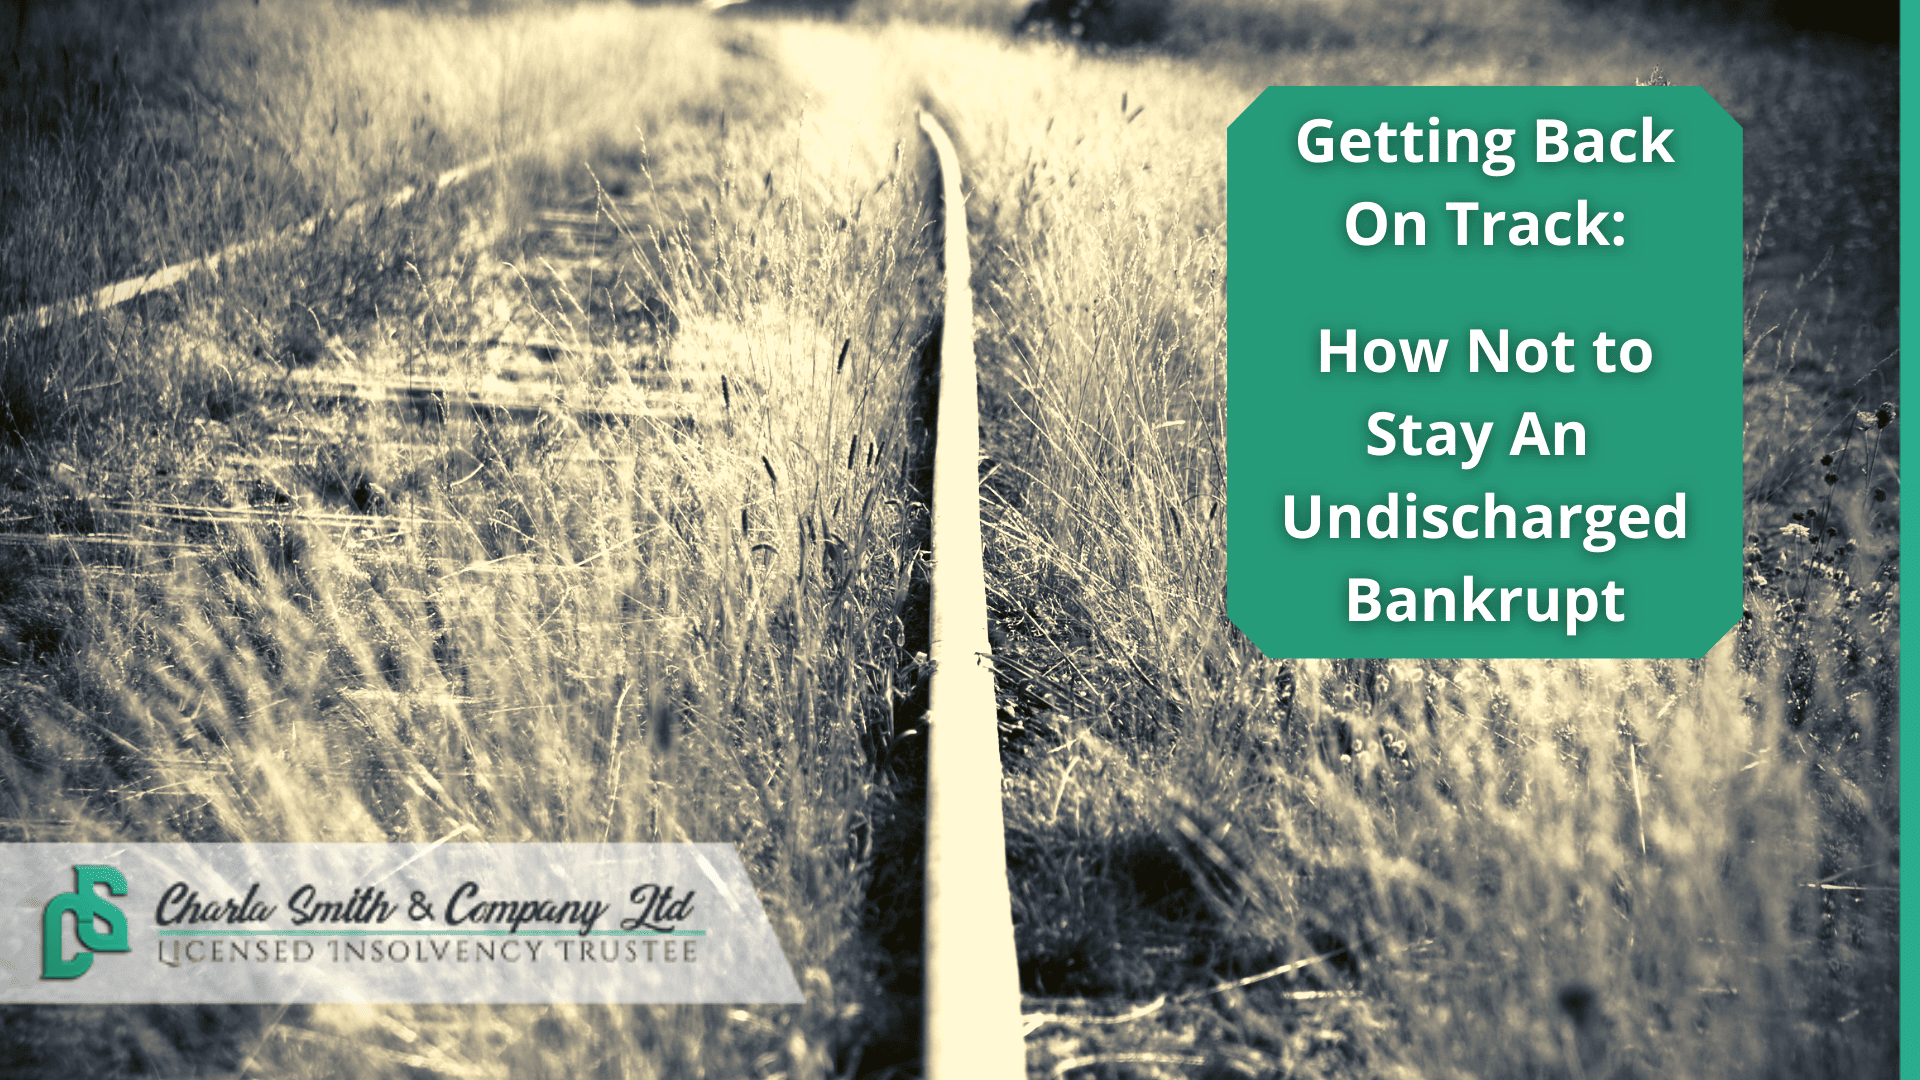 Getting Back On Track: How Not To Stay An Undischarged Bankrupt